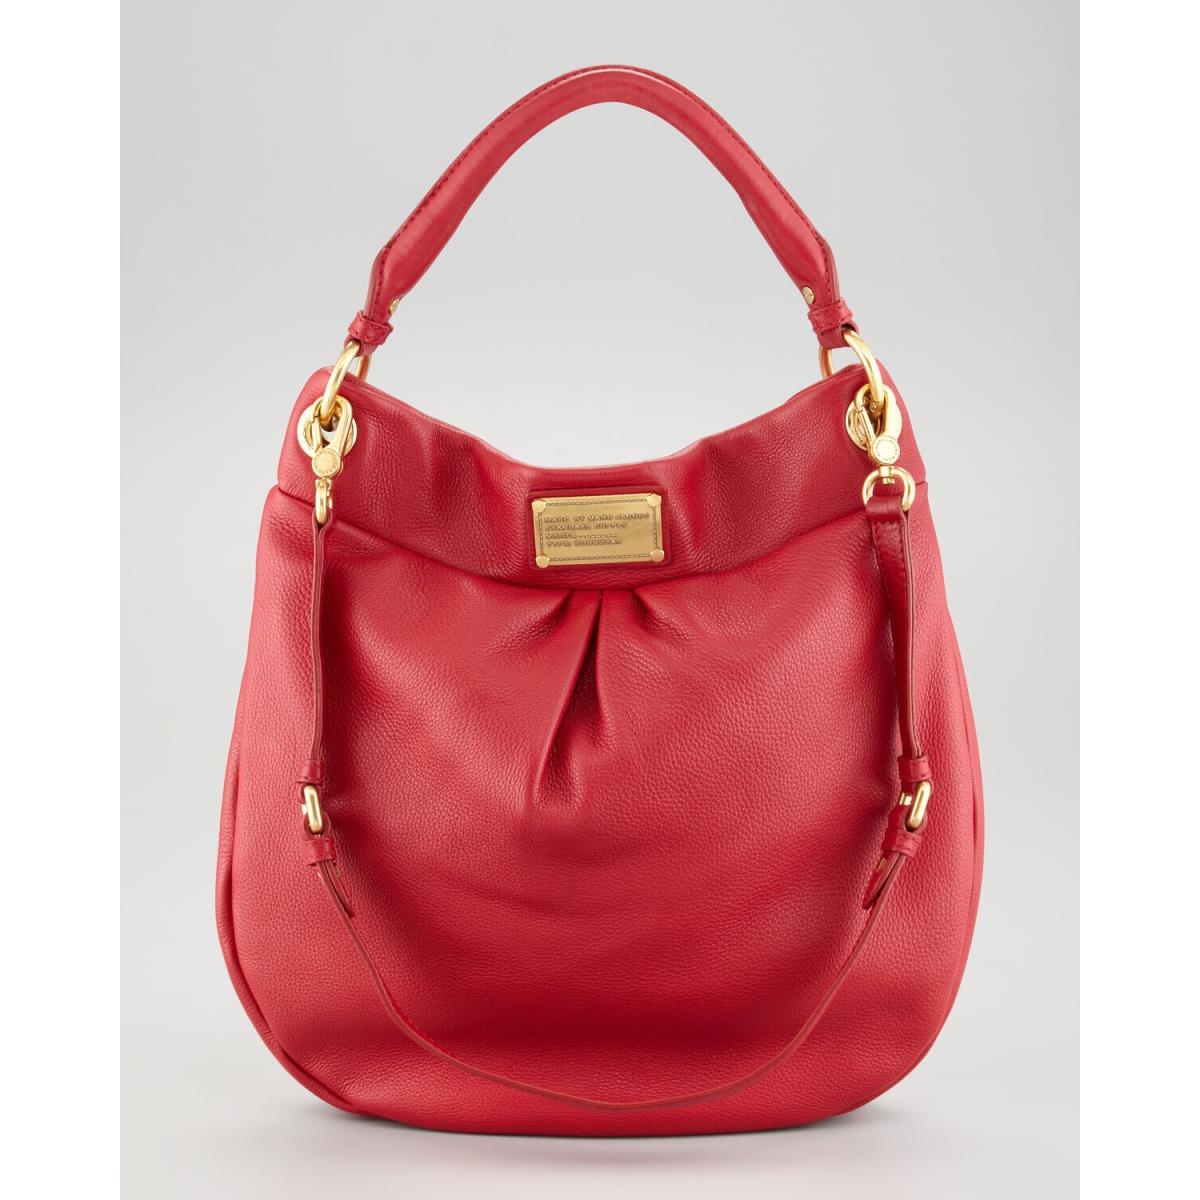 Marc by Marc Jacobs Classic Q Hillier Leather Hobo Bag Wild Raspberry Red